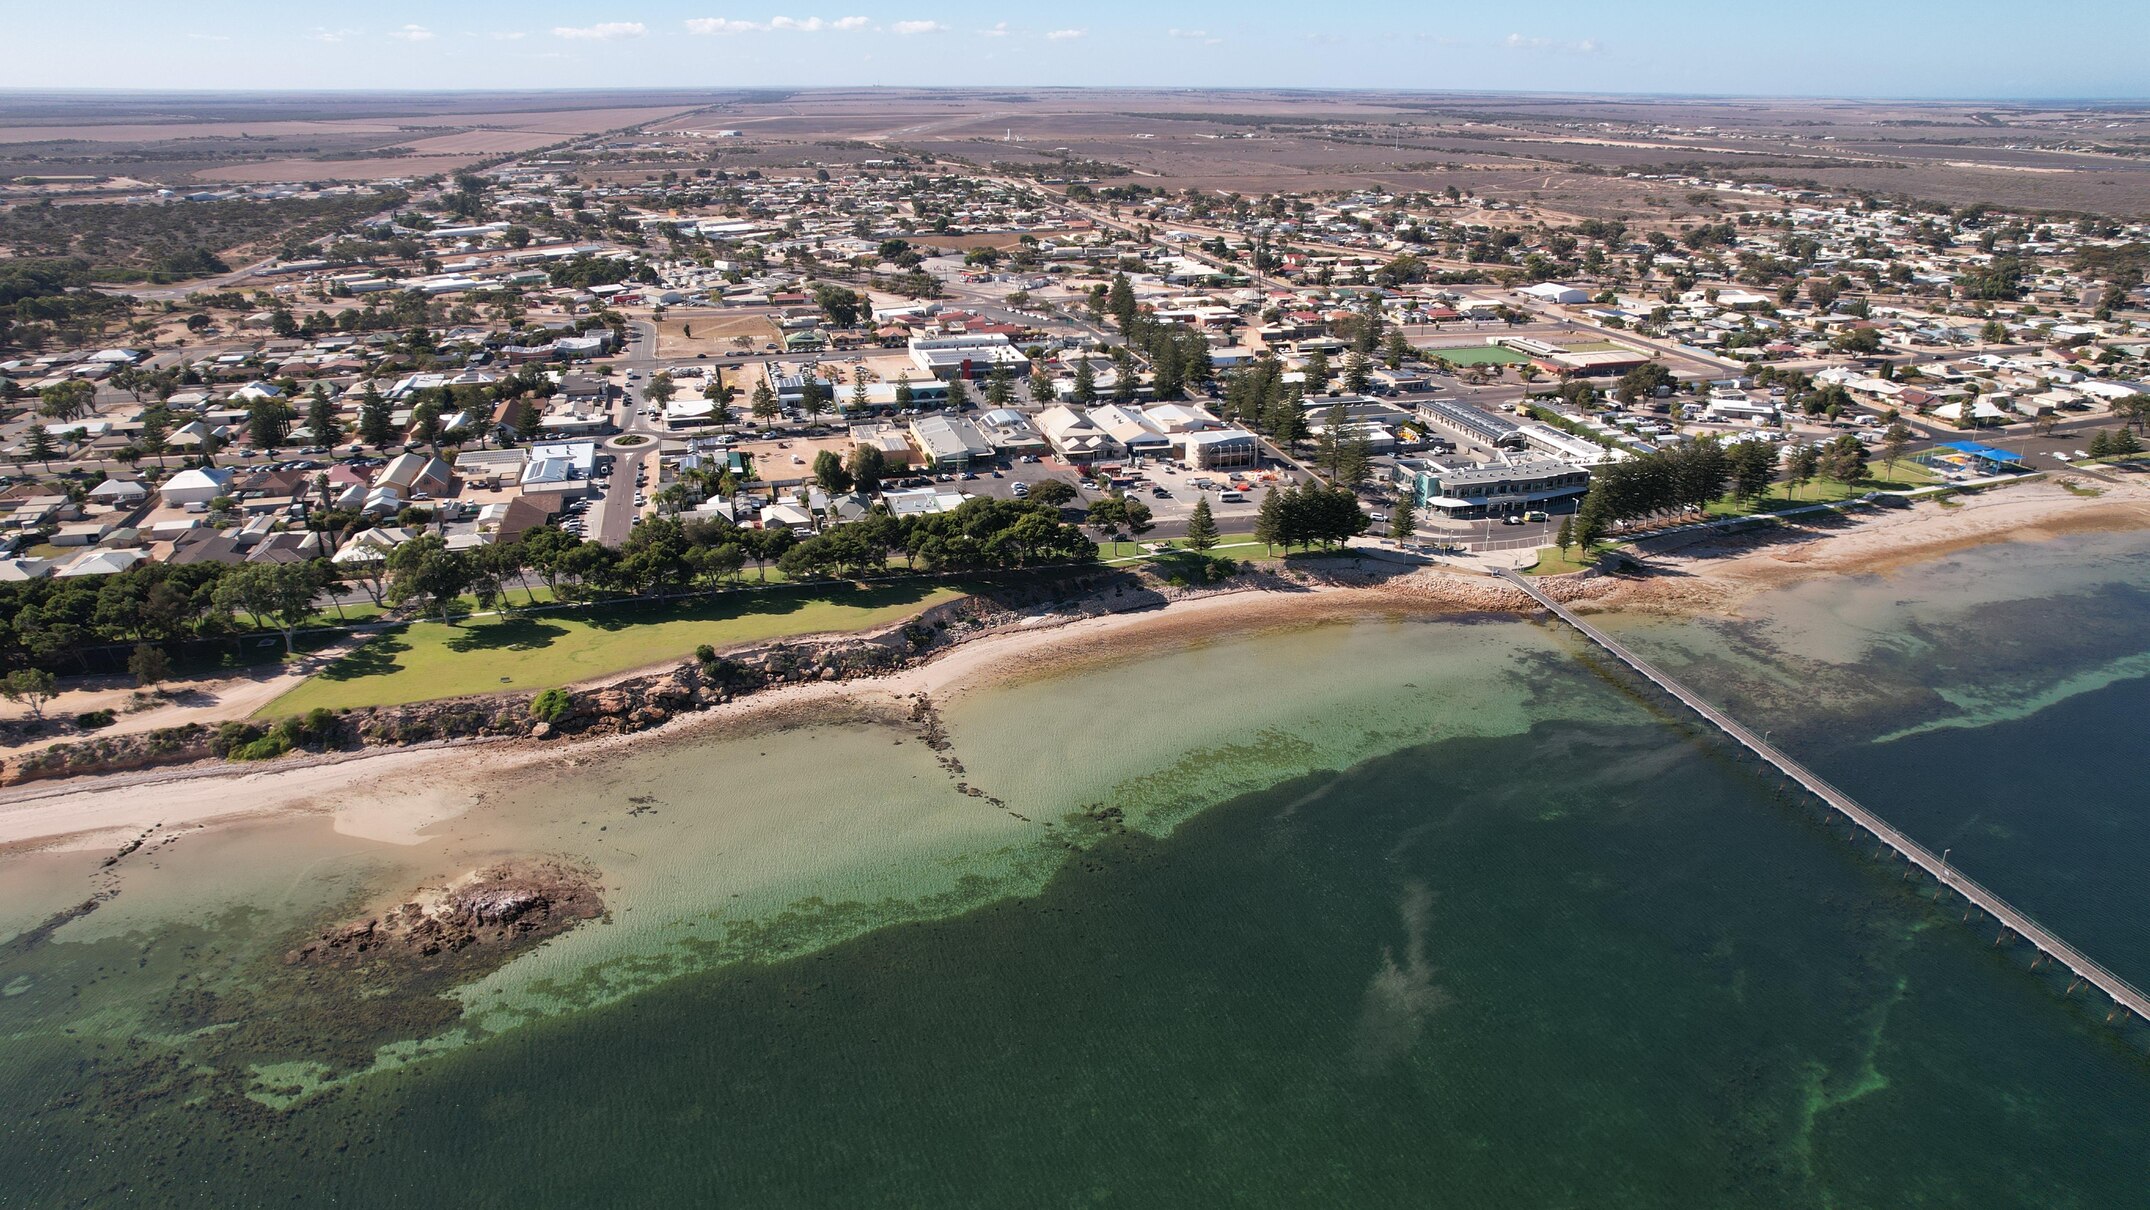 ceduna frustrated with alcohol-related issues as leaders call for investment in housing and jobs